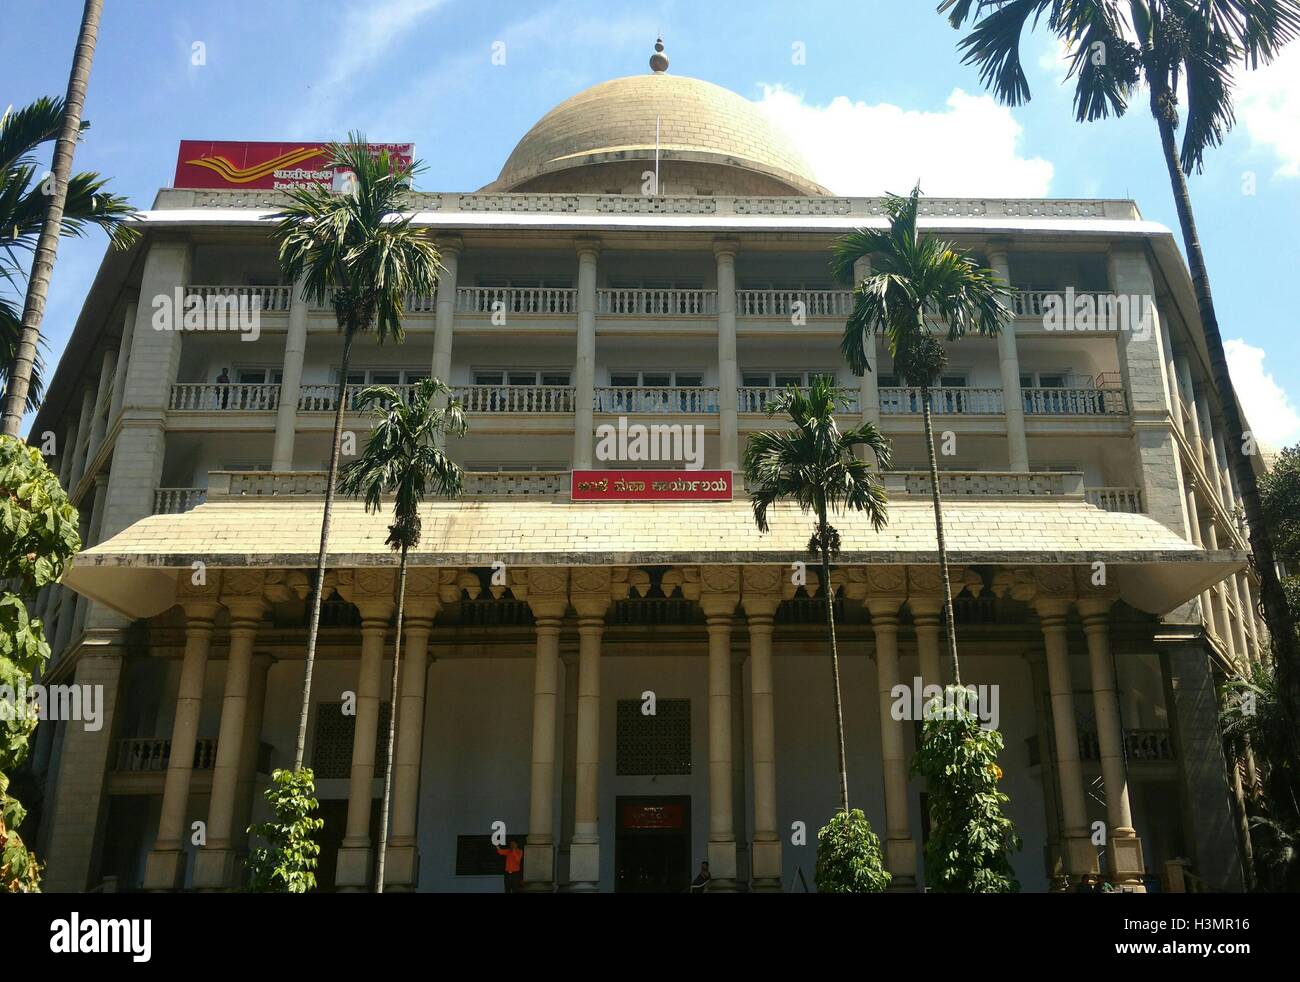 The big GPO building in Bengaluru India. It is one of the oldest structures in Bangalore. Located near shivaji nagar the heart of Bangalore. Stock Photo